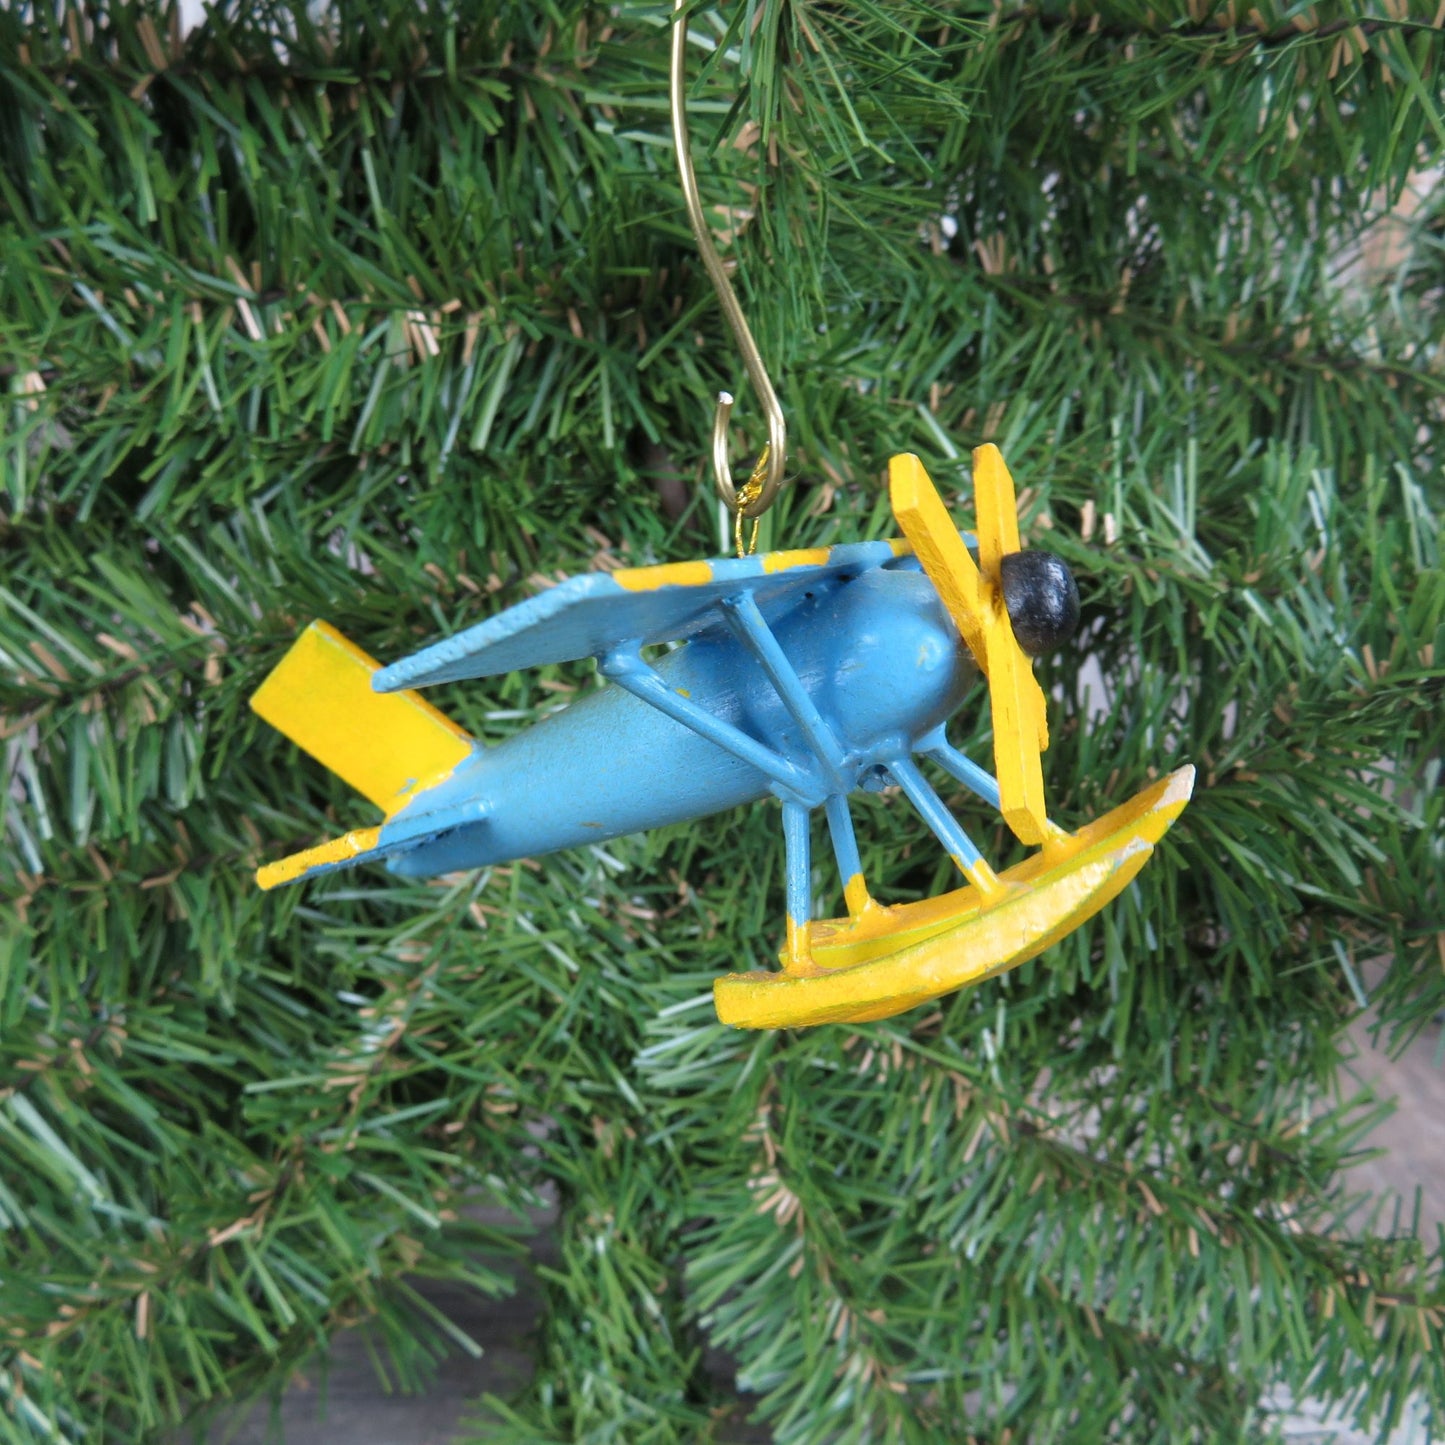 Vintage Blue and Yellow Airplane Ornament Wooden Seaplane Biplane Christmas Ornament